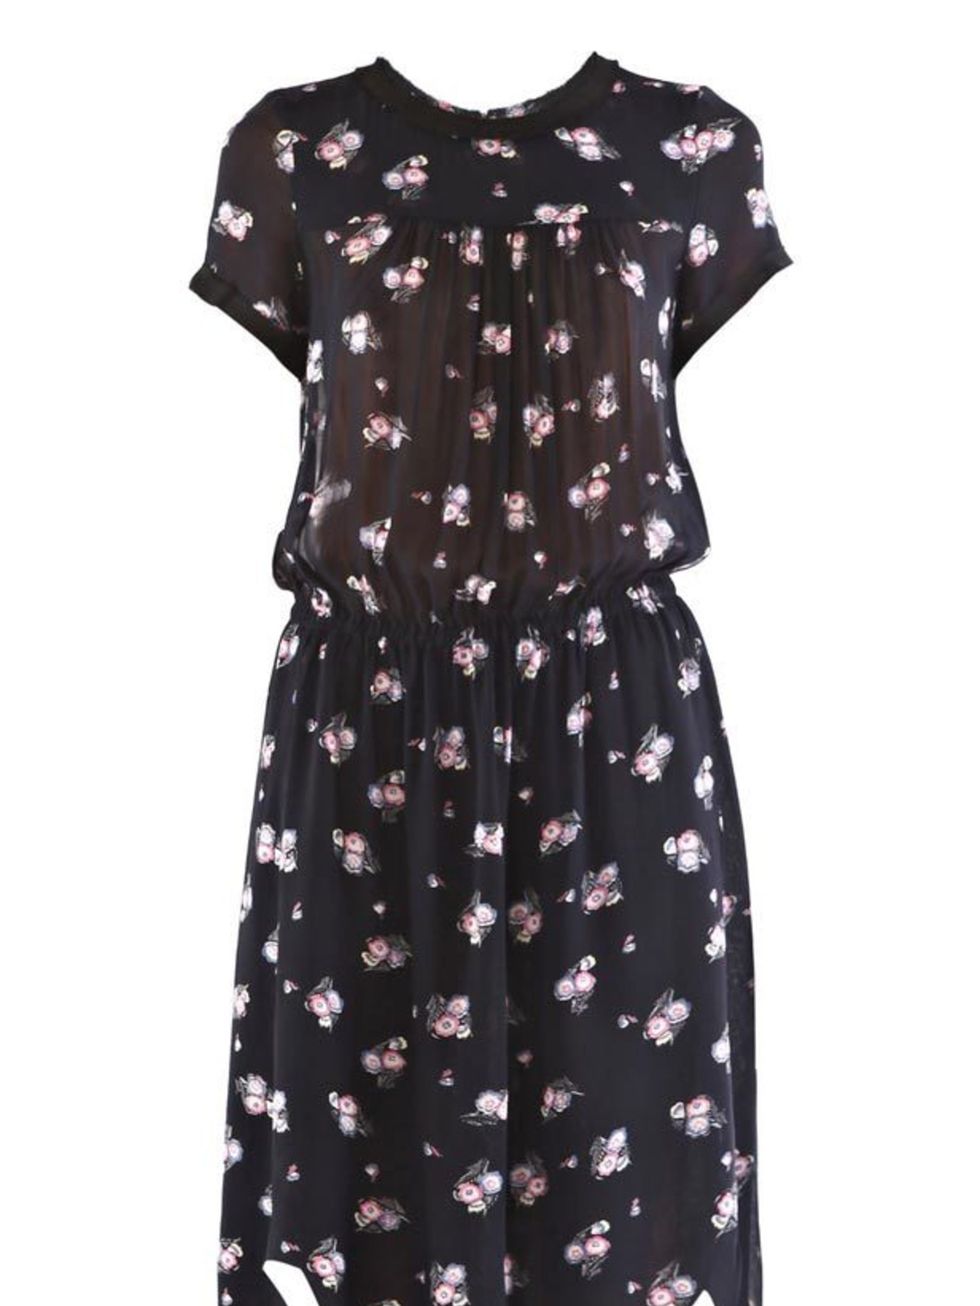 <p>Etoile Isabel Marant floral midi dress, £235, at <a href="http://www.matchesfashion.com/fcp/product/Matches-Fashion//isabel-marant-etoile-ET-B-VERTILLA24E232-dresses-NAVY-MULTI/50293">Matches</a></p>